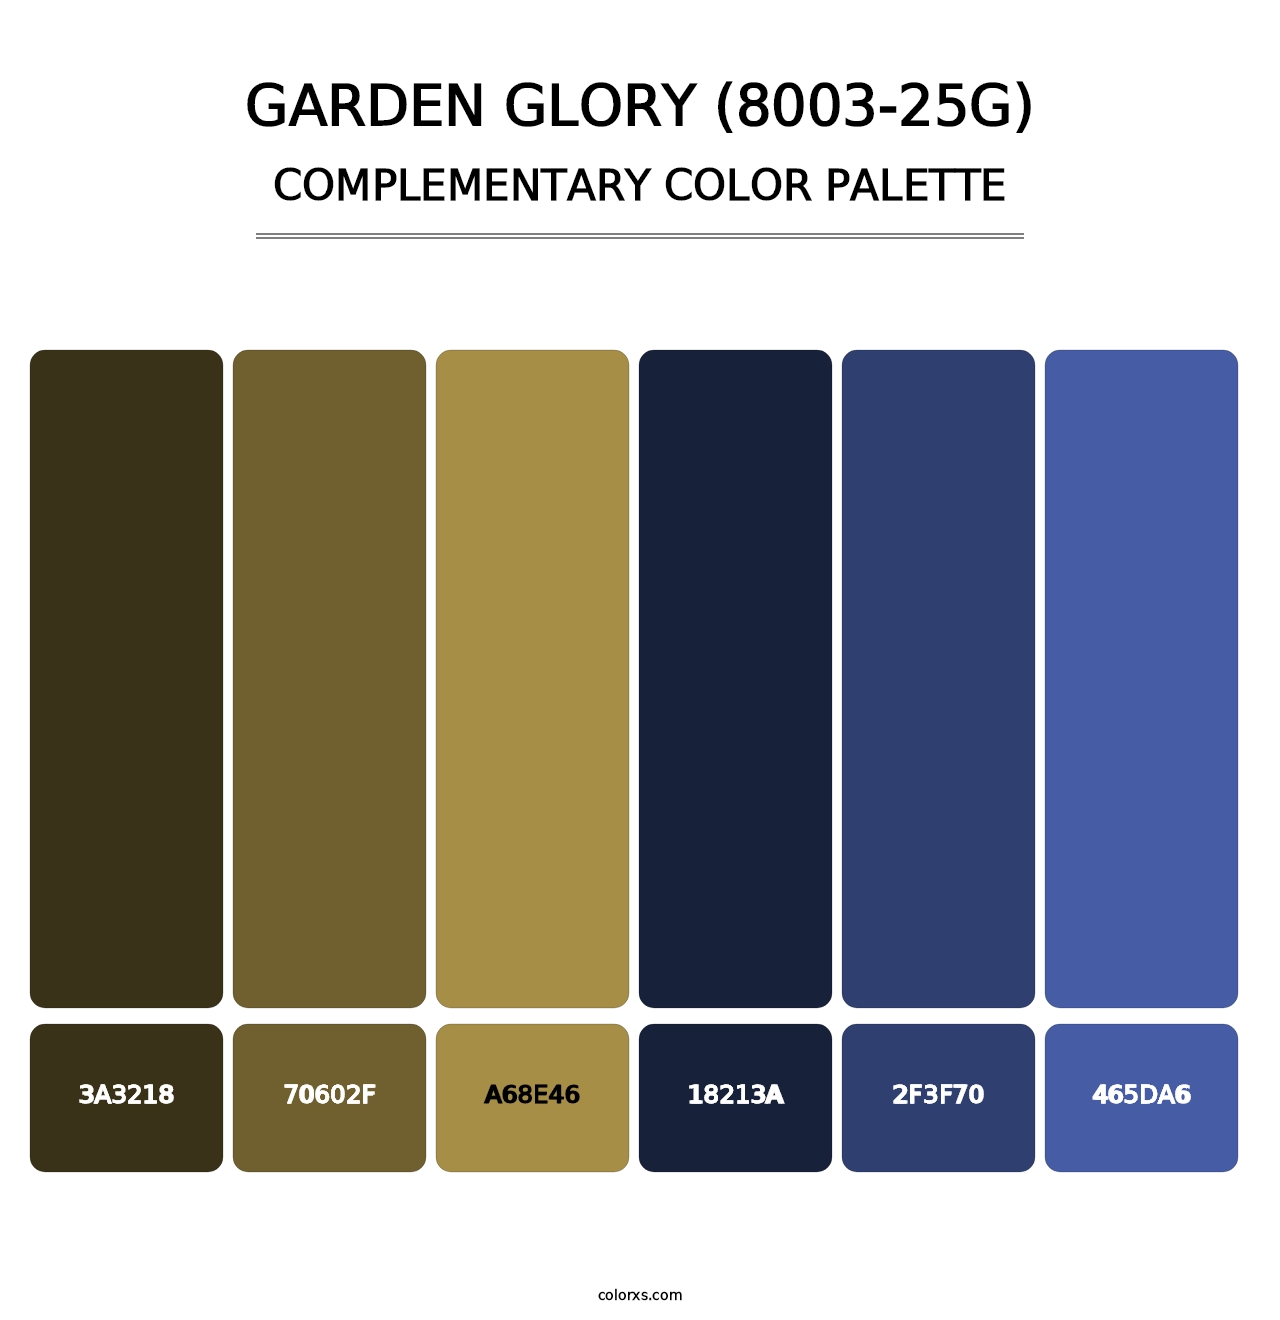 Garden Glory (8003-25G) - Complementary Color Palette